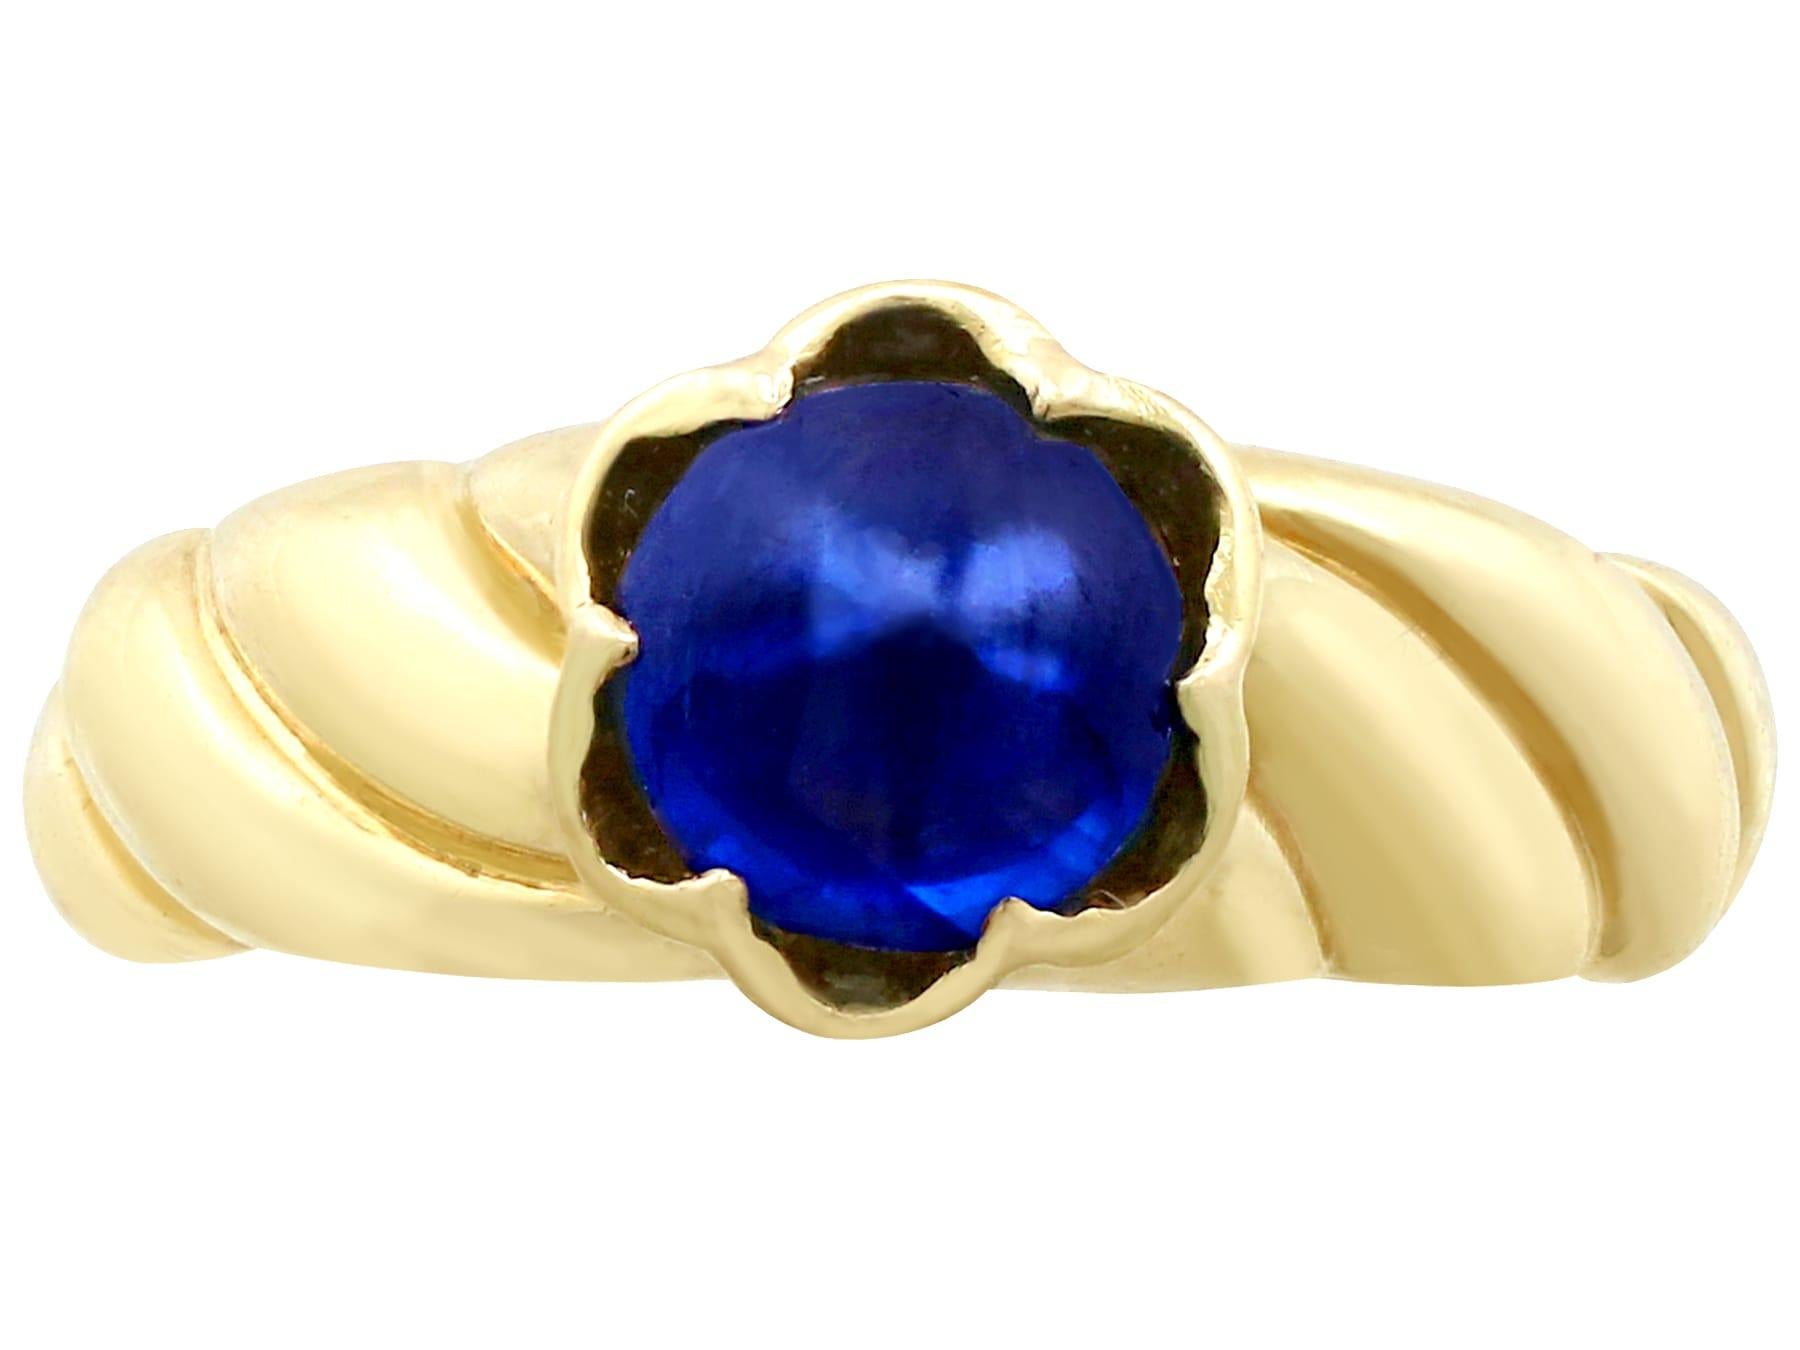 Women's 1980s 1.22 Carat Cabochon Cut Sapphire 18 K Yellow Gold Cocktail Ring For Sale